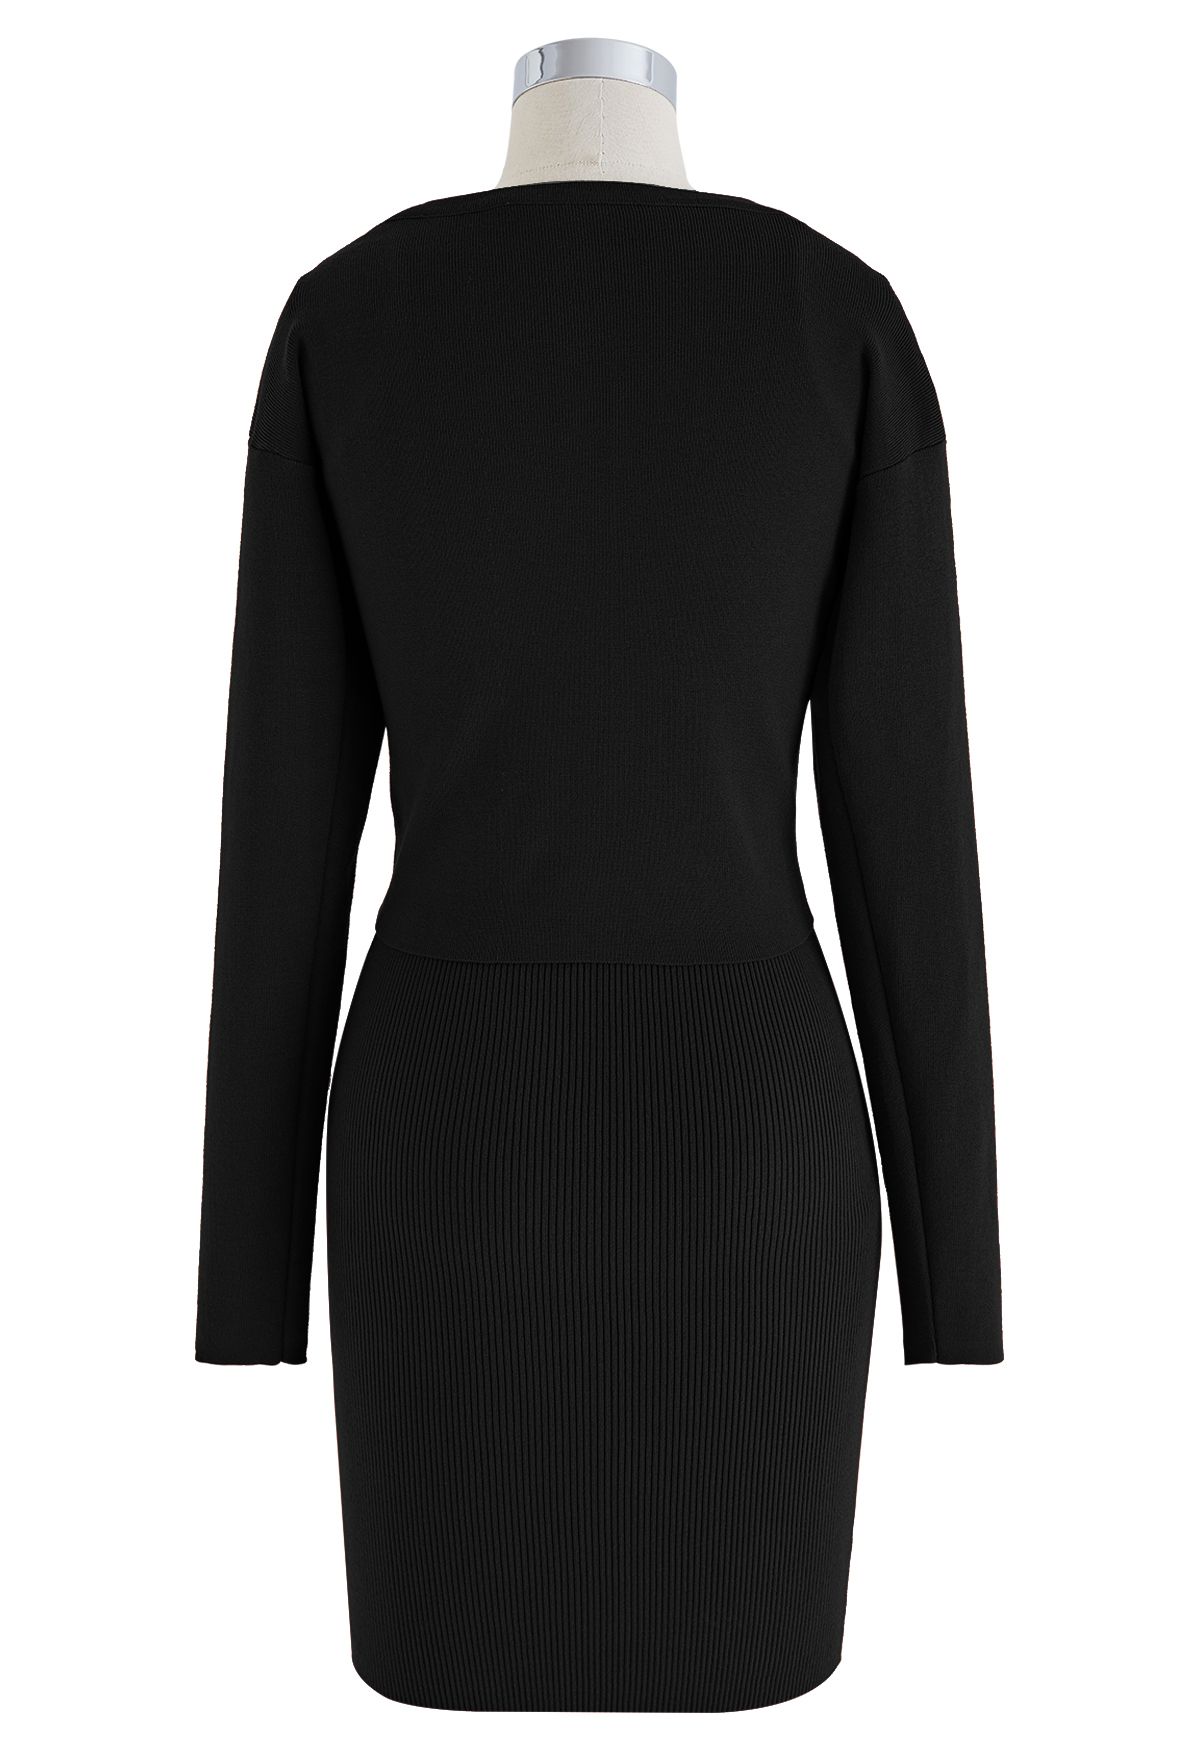 Twist Front Two-Piece Bodycon Knit Dress in Black - Retro, Indie and ...